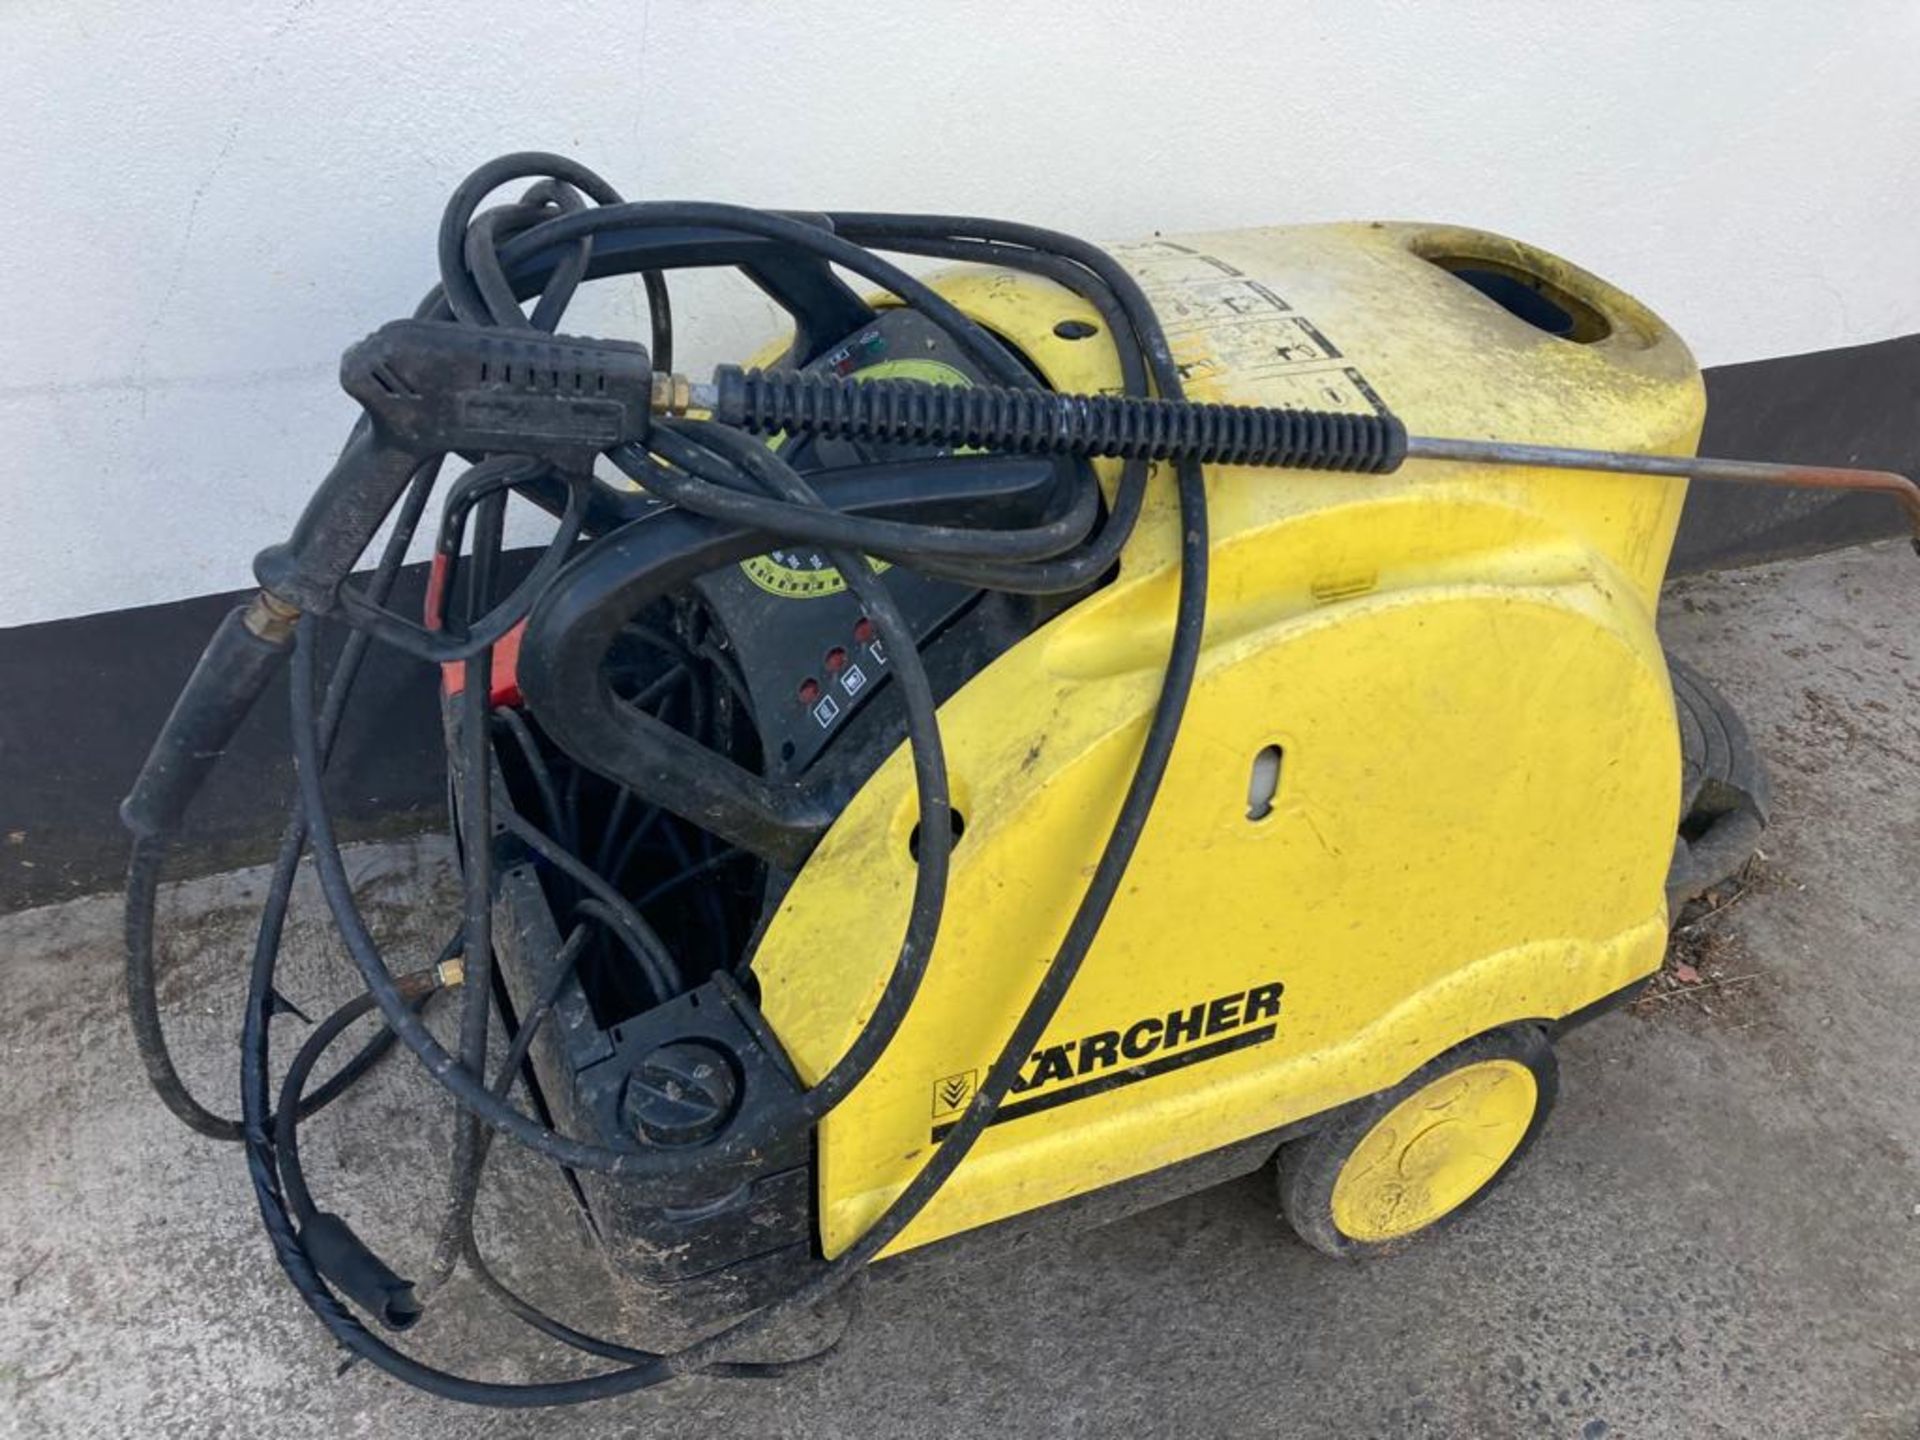 KARCHER DIESEL HOT AND COLD POWER WASHER LOCATION NORTHERN IREALND